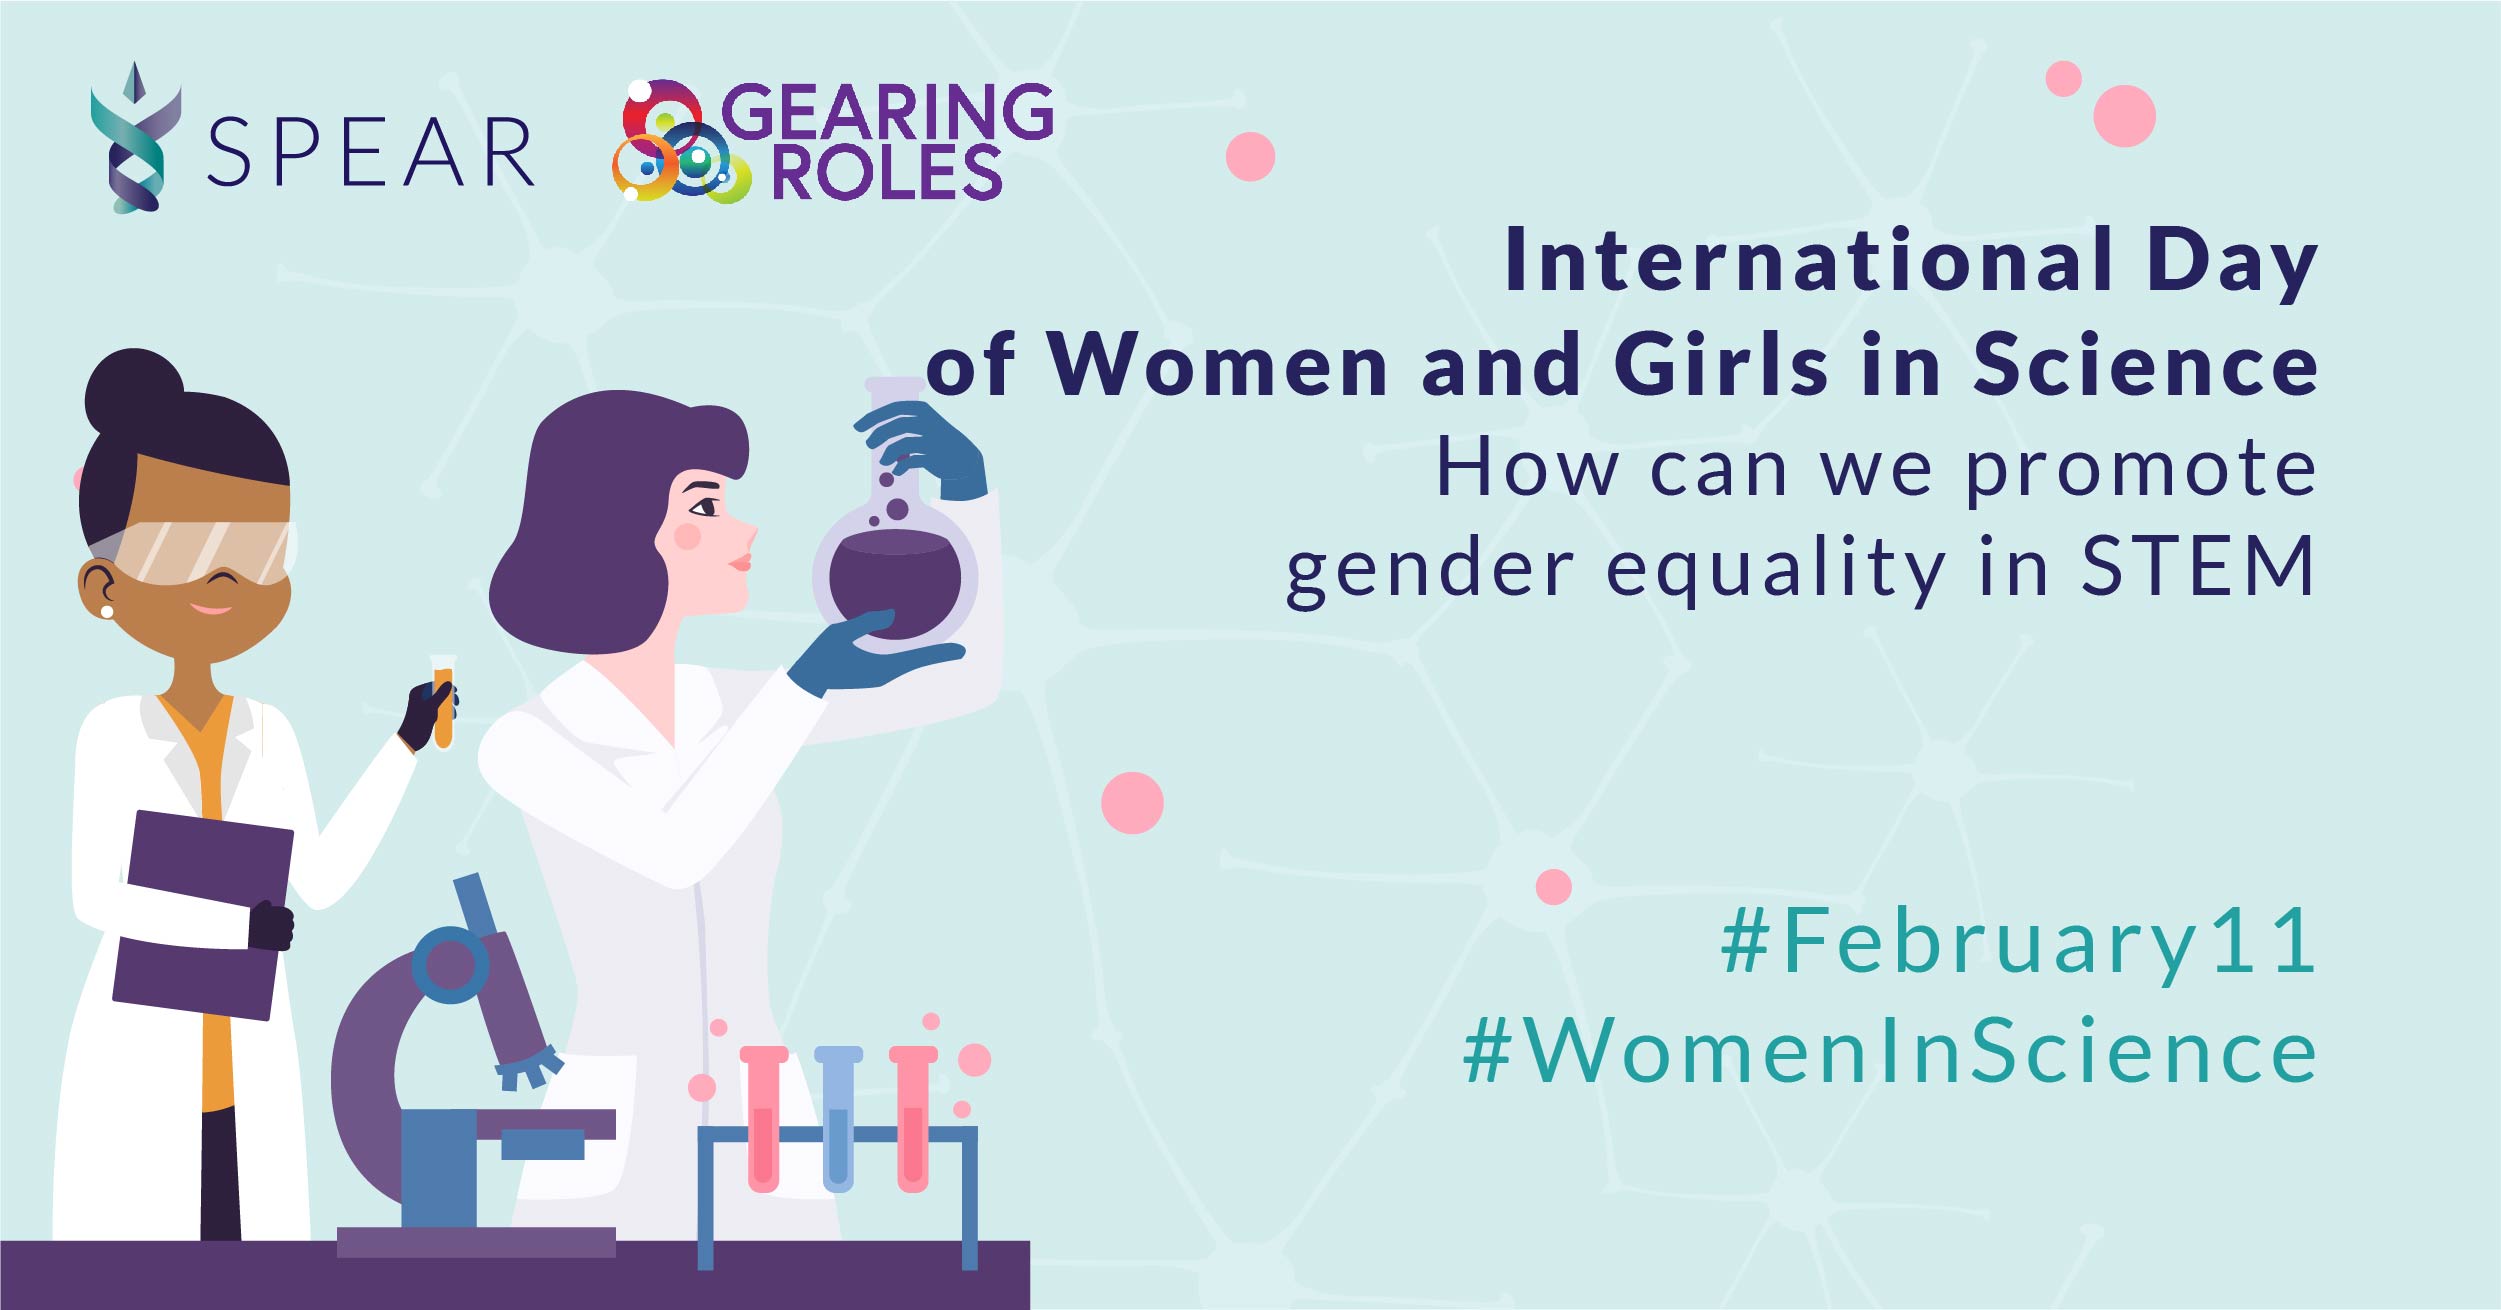 International Day of Women and Girls in Science: How can we promote gender equality in STEM